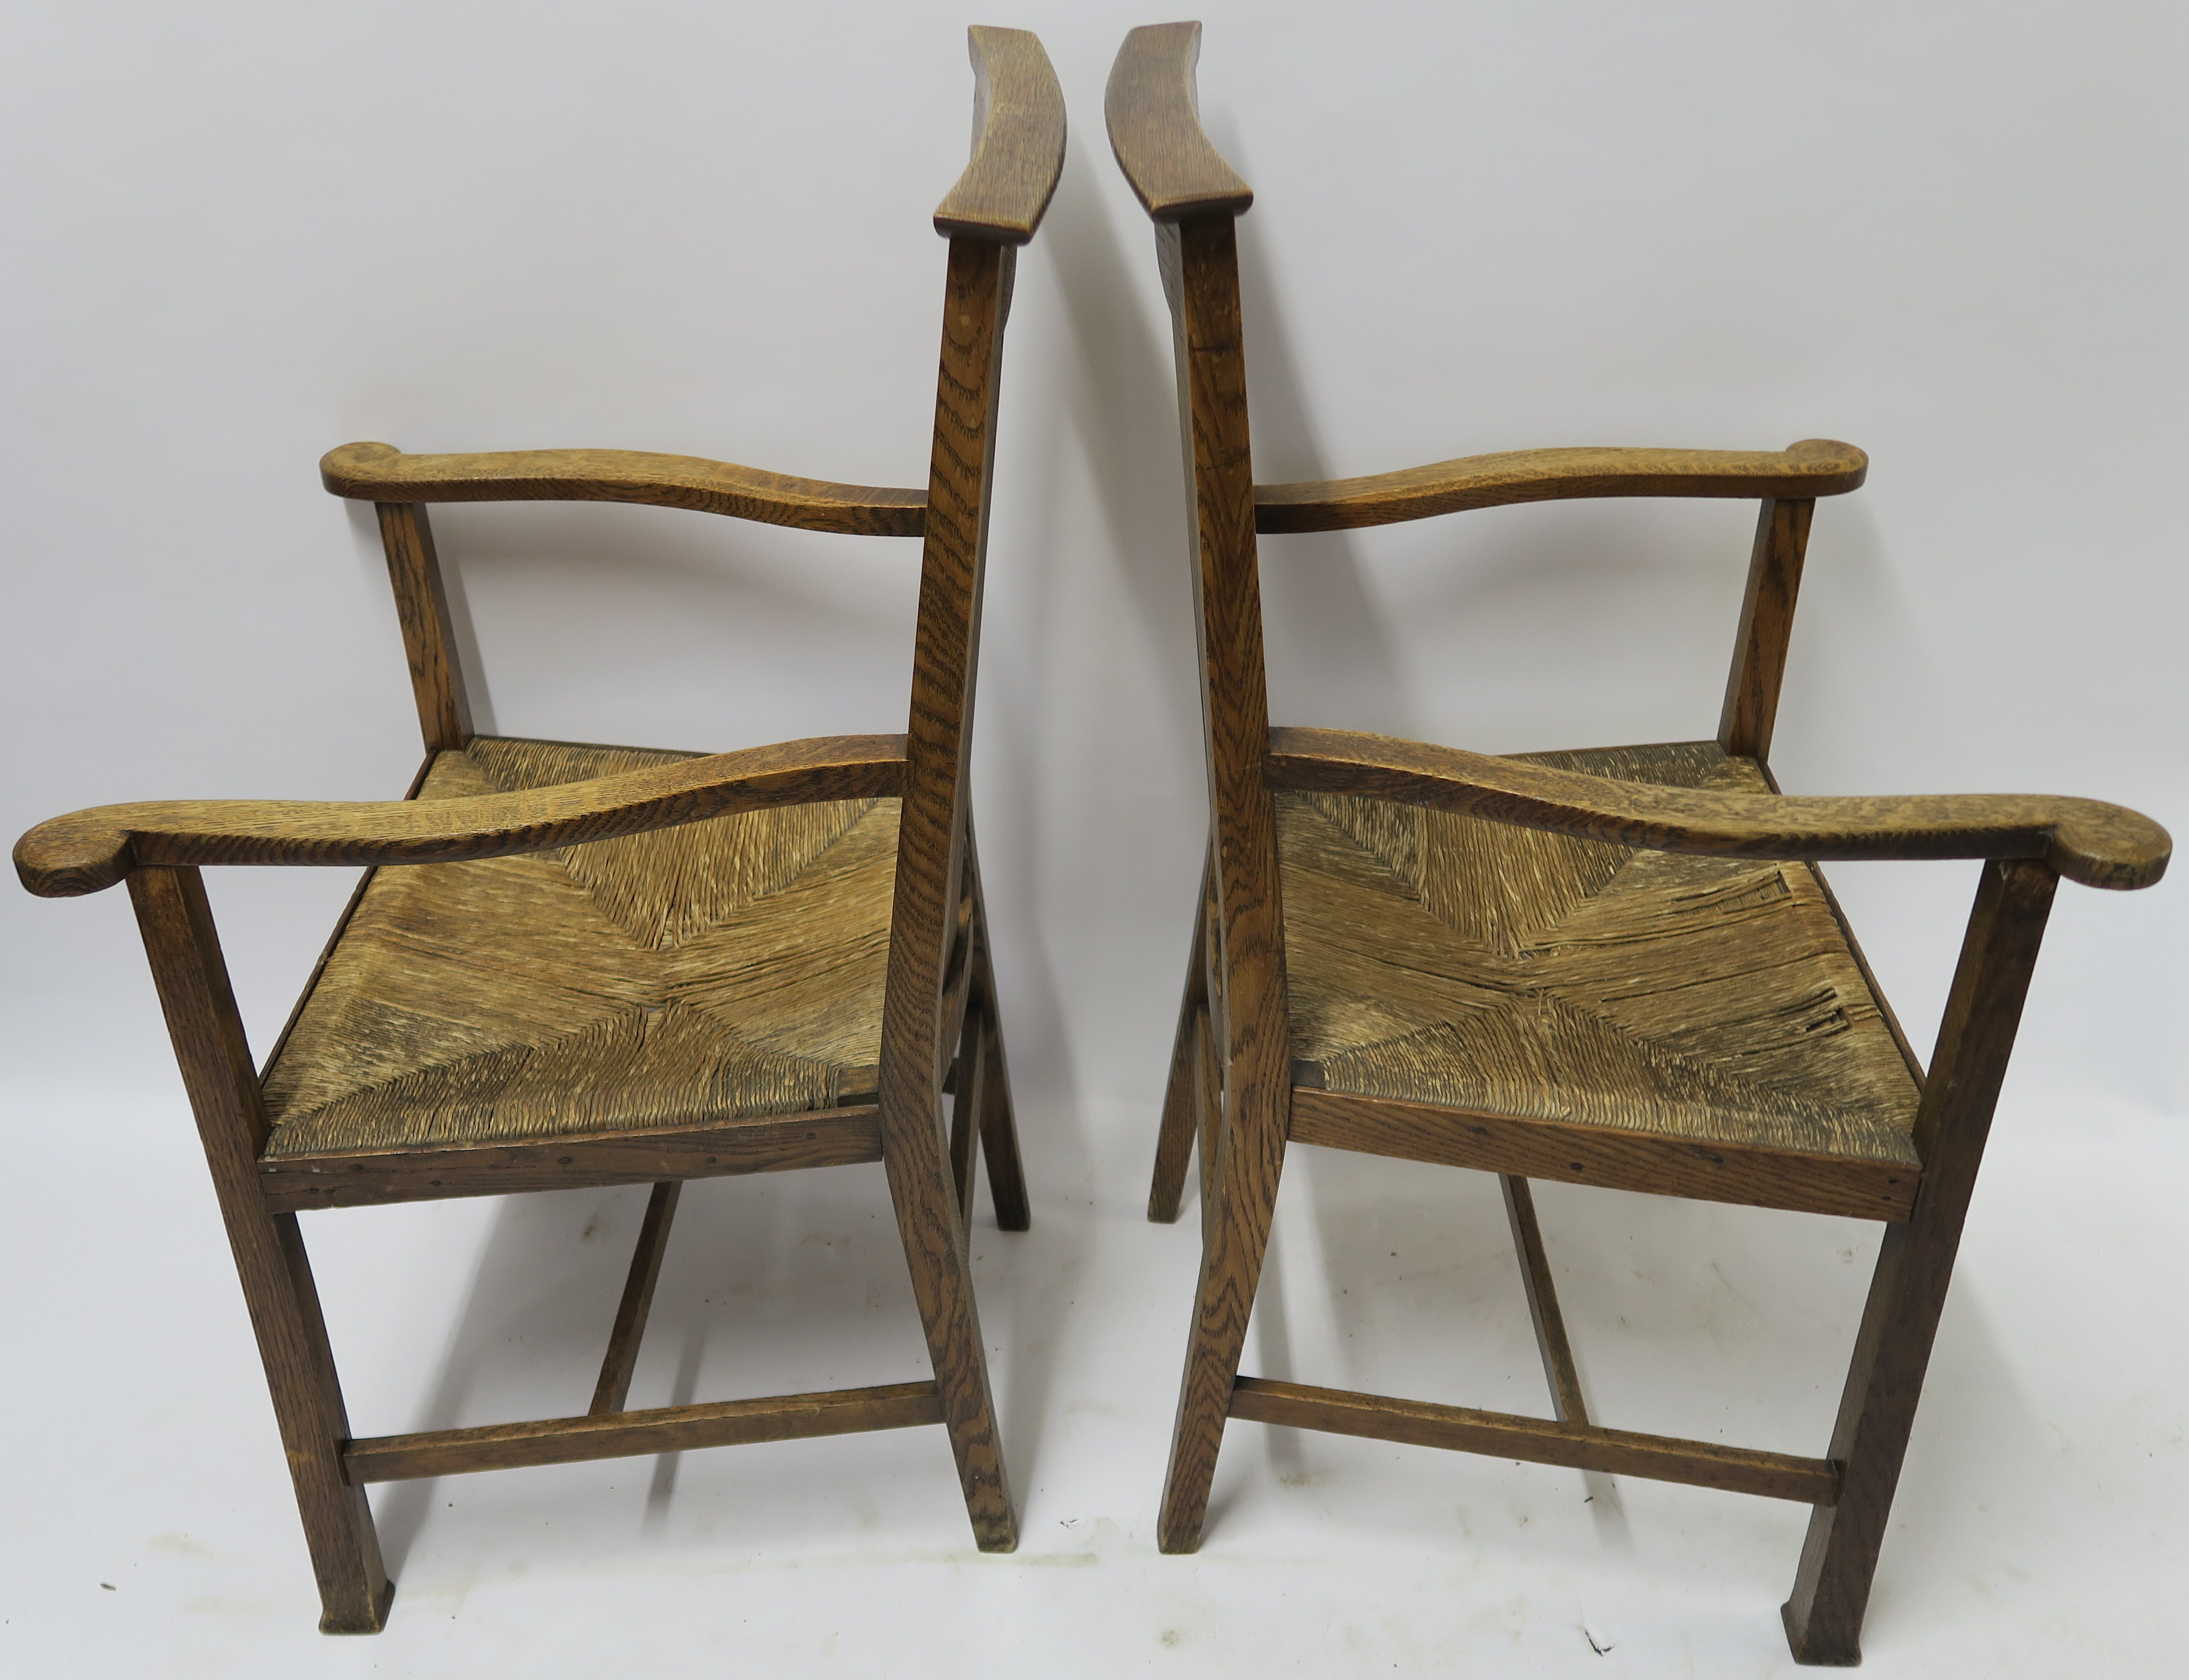 A SET OF SIX ARTS AND CRAFTS DINING CHAIRS WITH RUSH SEATS 103cm and 100cm high and two other chairs - Image 7 of 22